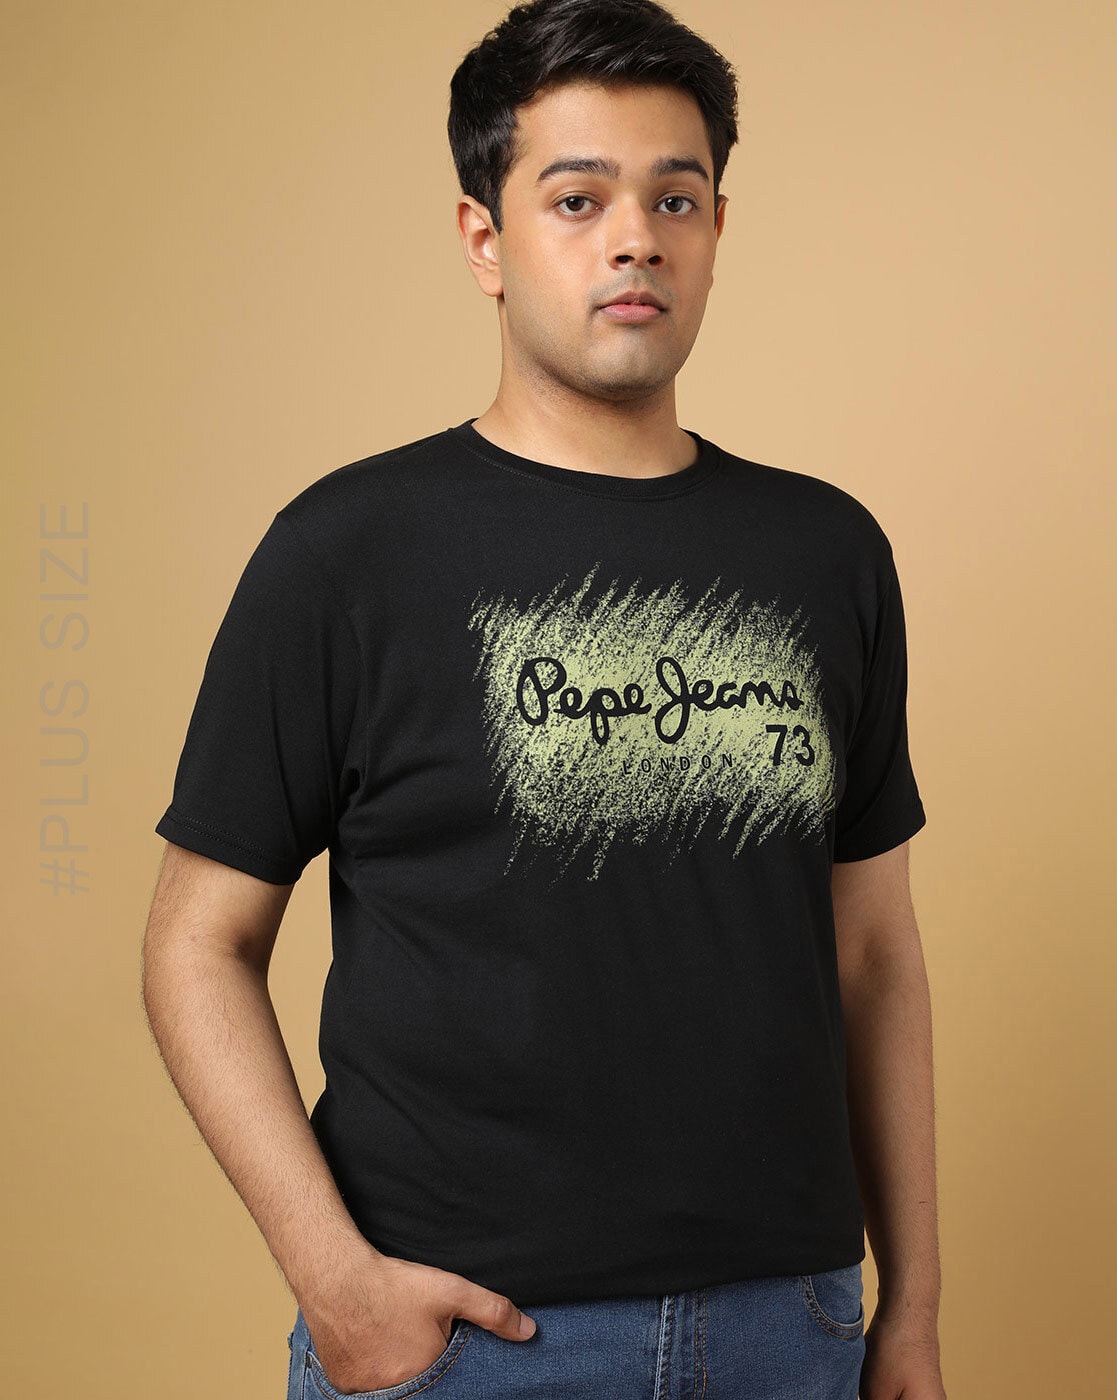 Buy Black Tshirts for Men by Pepe Jeans Online